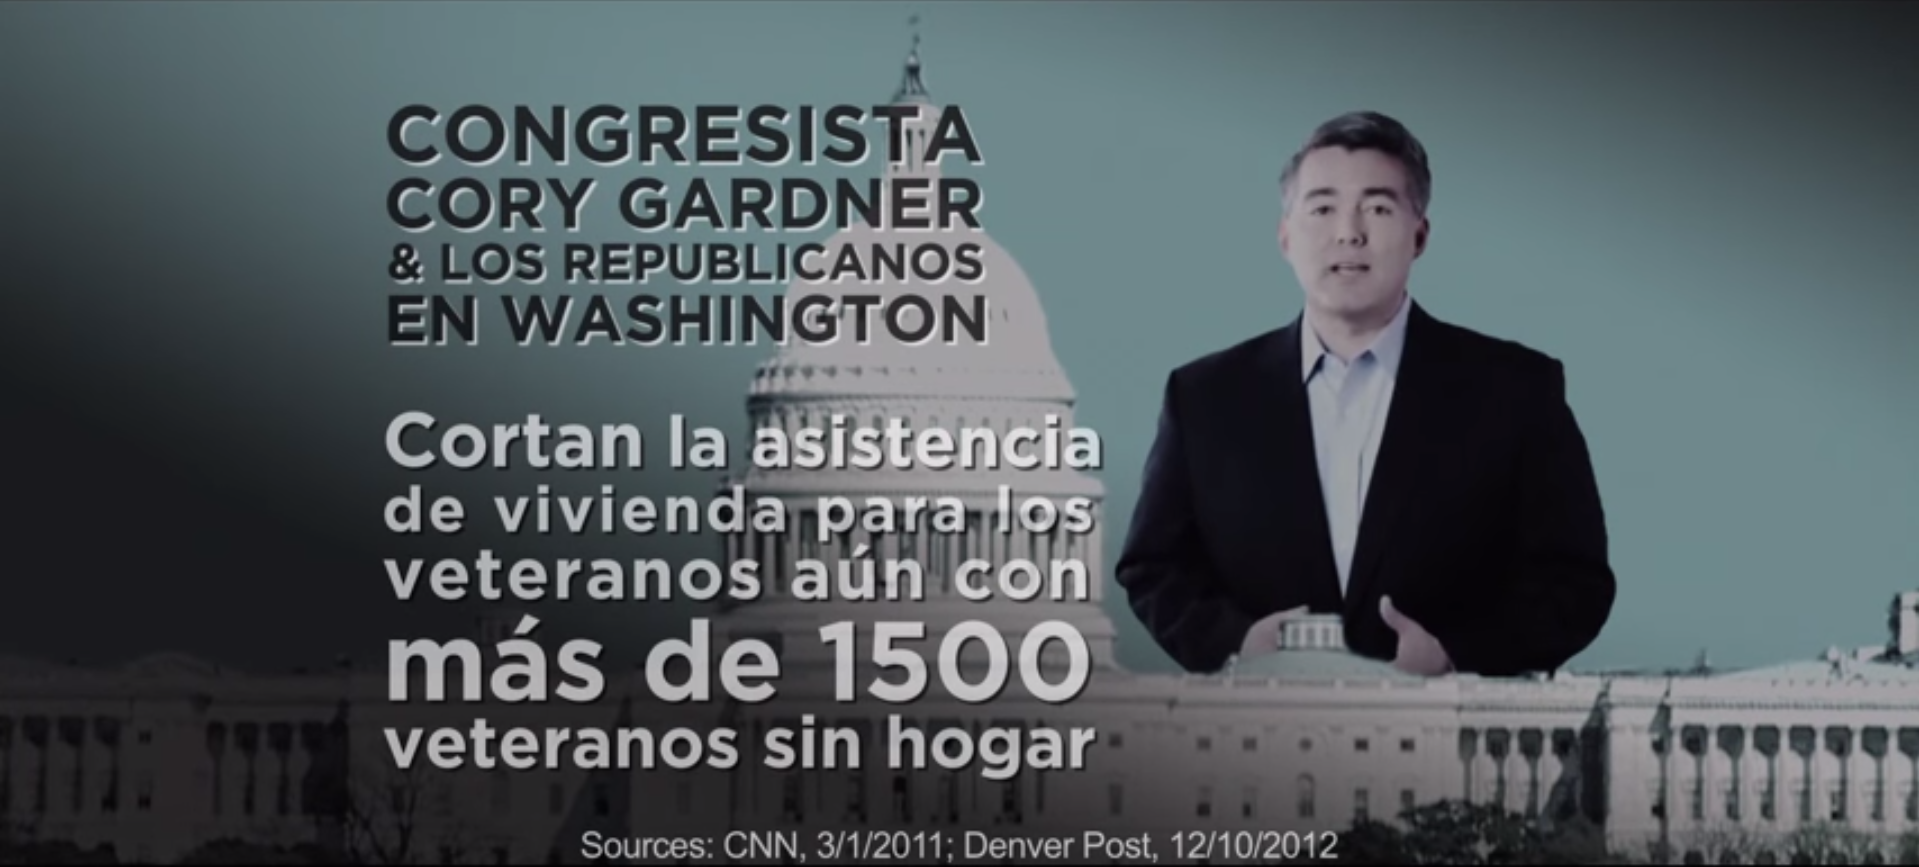 Campaigns spend big to woo Latino voters with Spanish-language ads